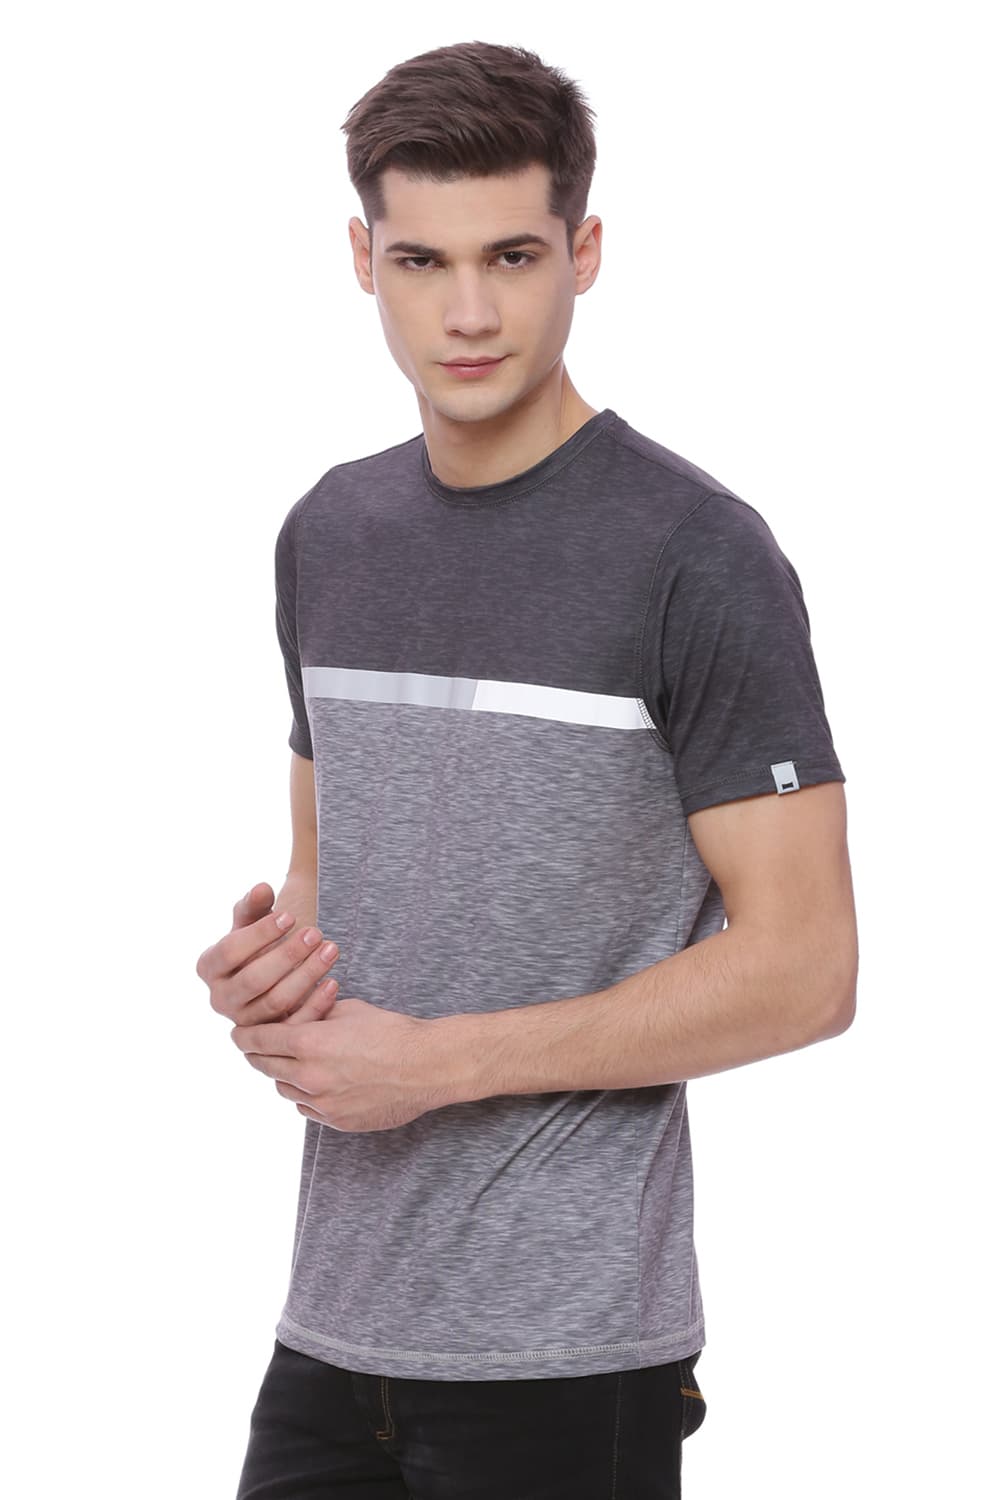 BASICS MUSCLE FIT SPACE PRINTED CREW NECK T SHIRT